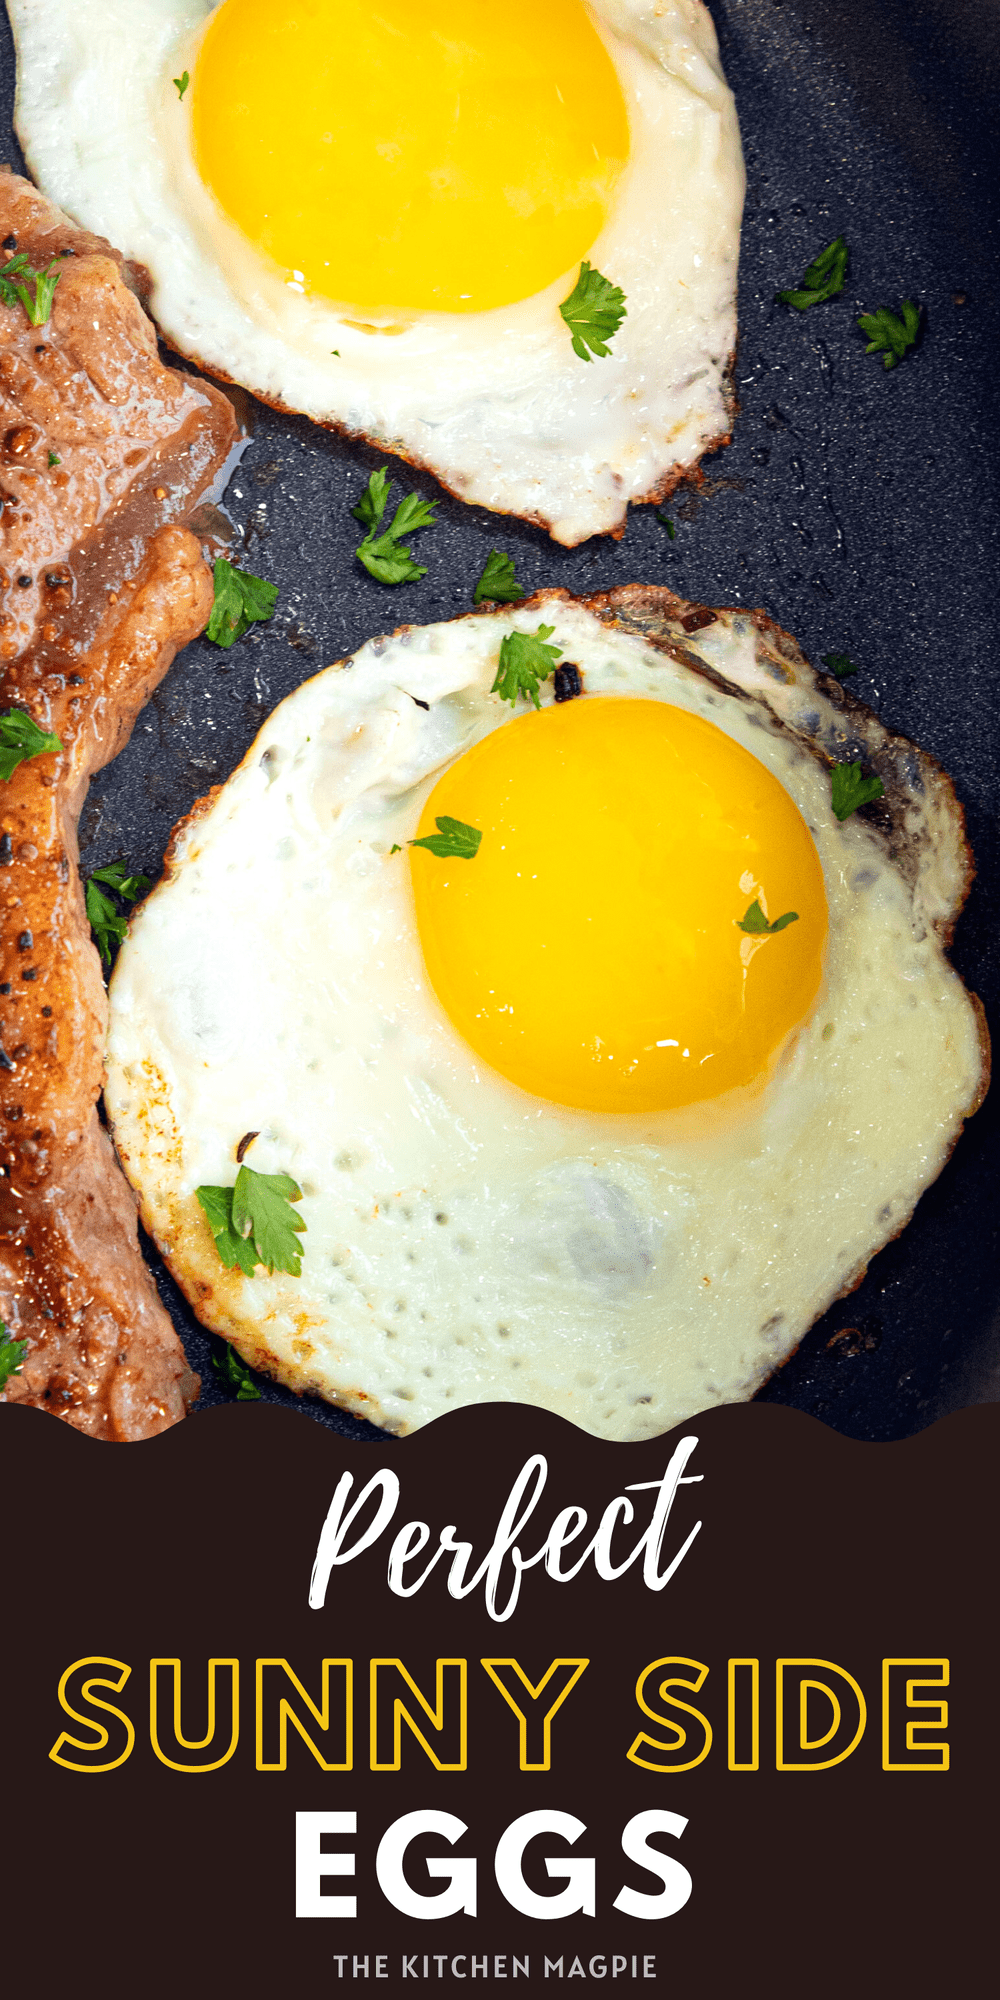 Sunny side up eggs with crispy browned bottoms are easy to make, if you know the right method! These are perfect for dipping toast into or topping your favorite dinner with!